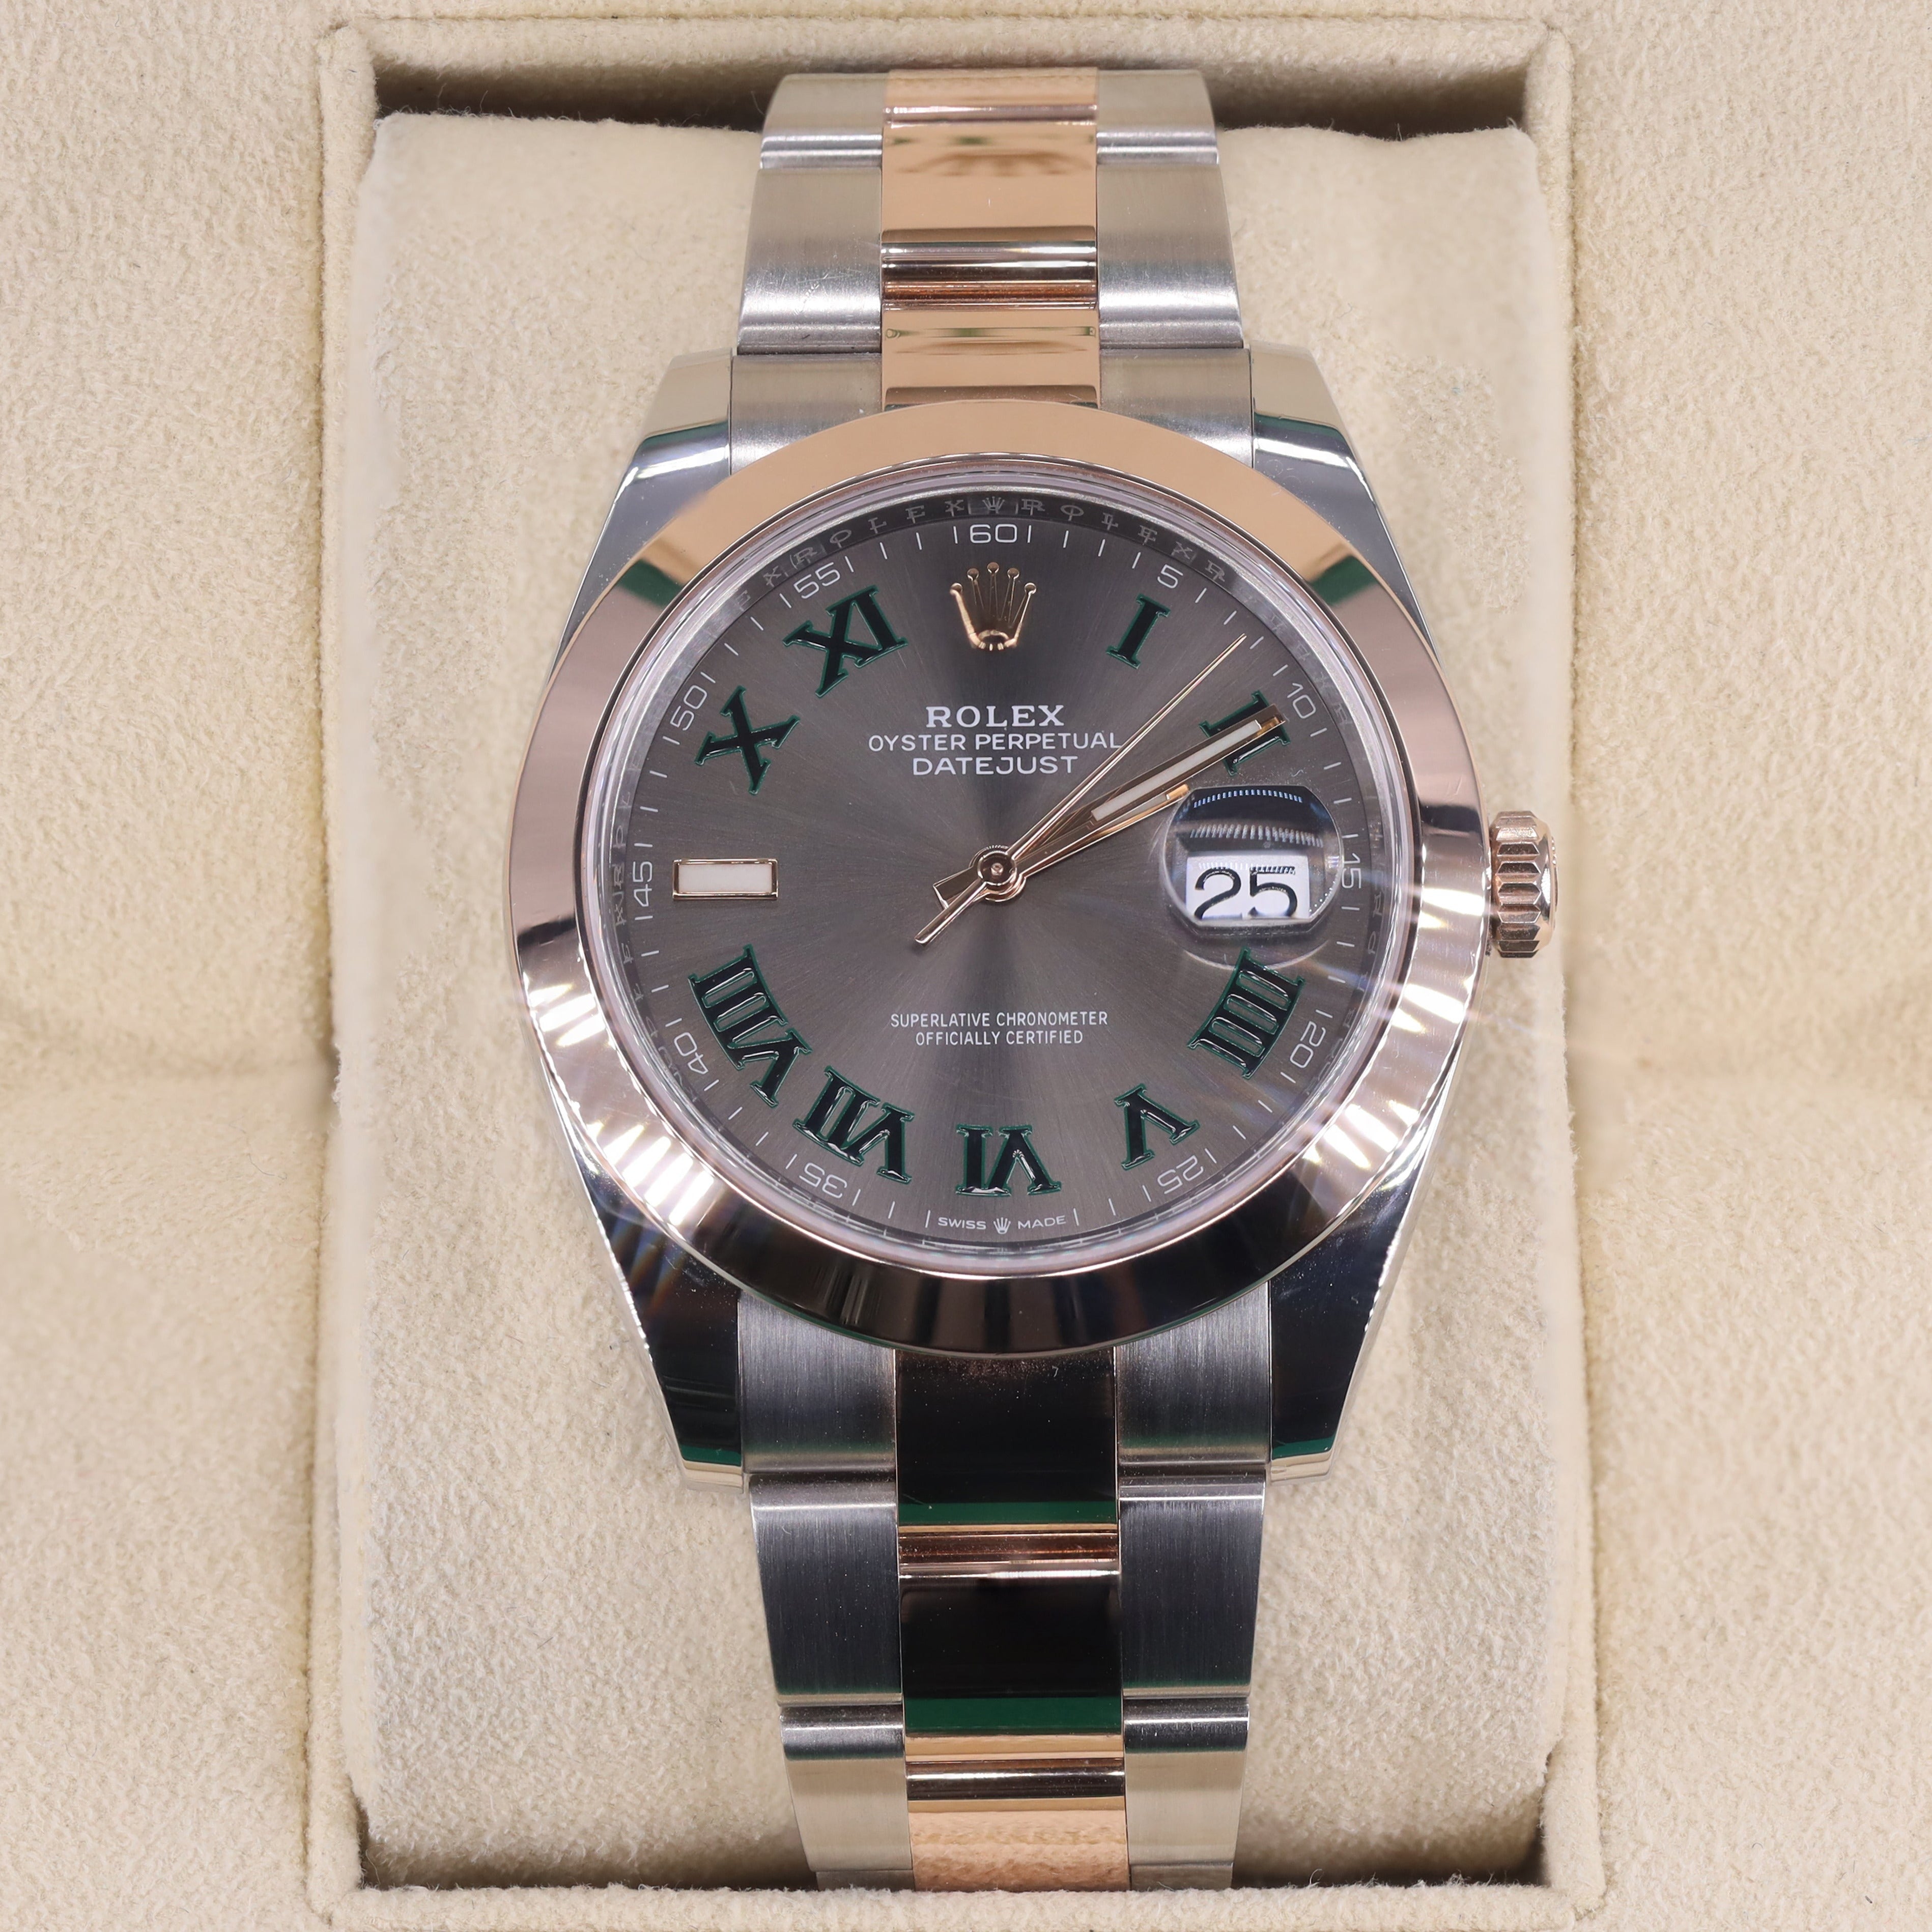 Rolex 126301 Datejust 41mm Two-Tone Rose Gold Wimbledon Dial